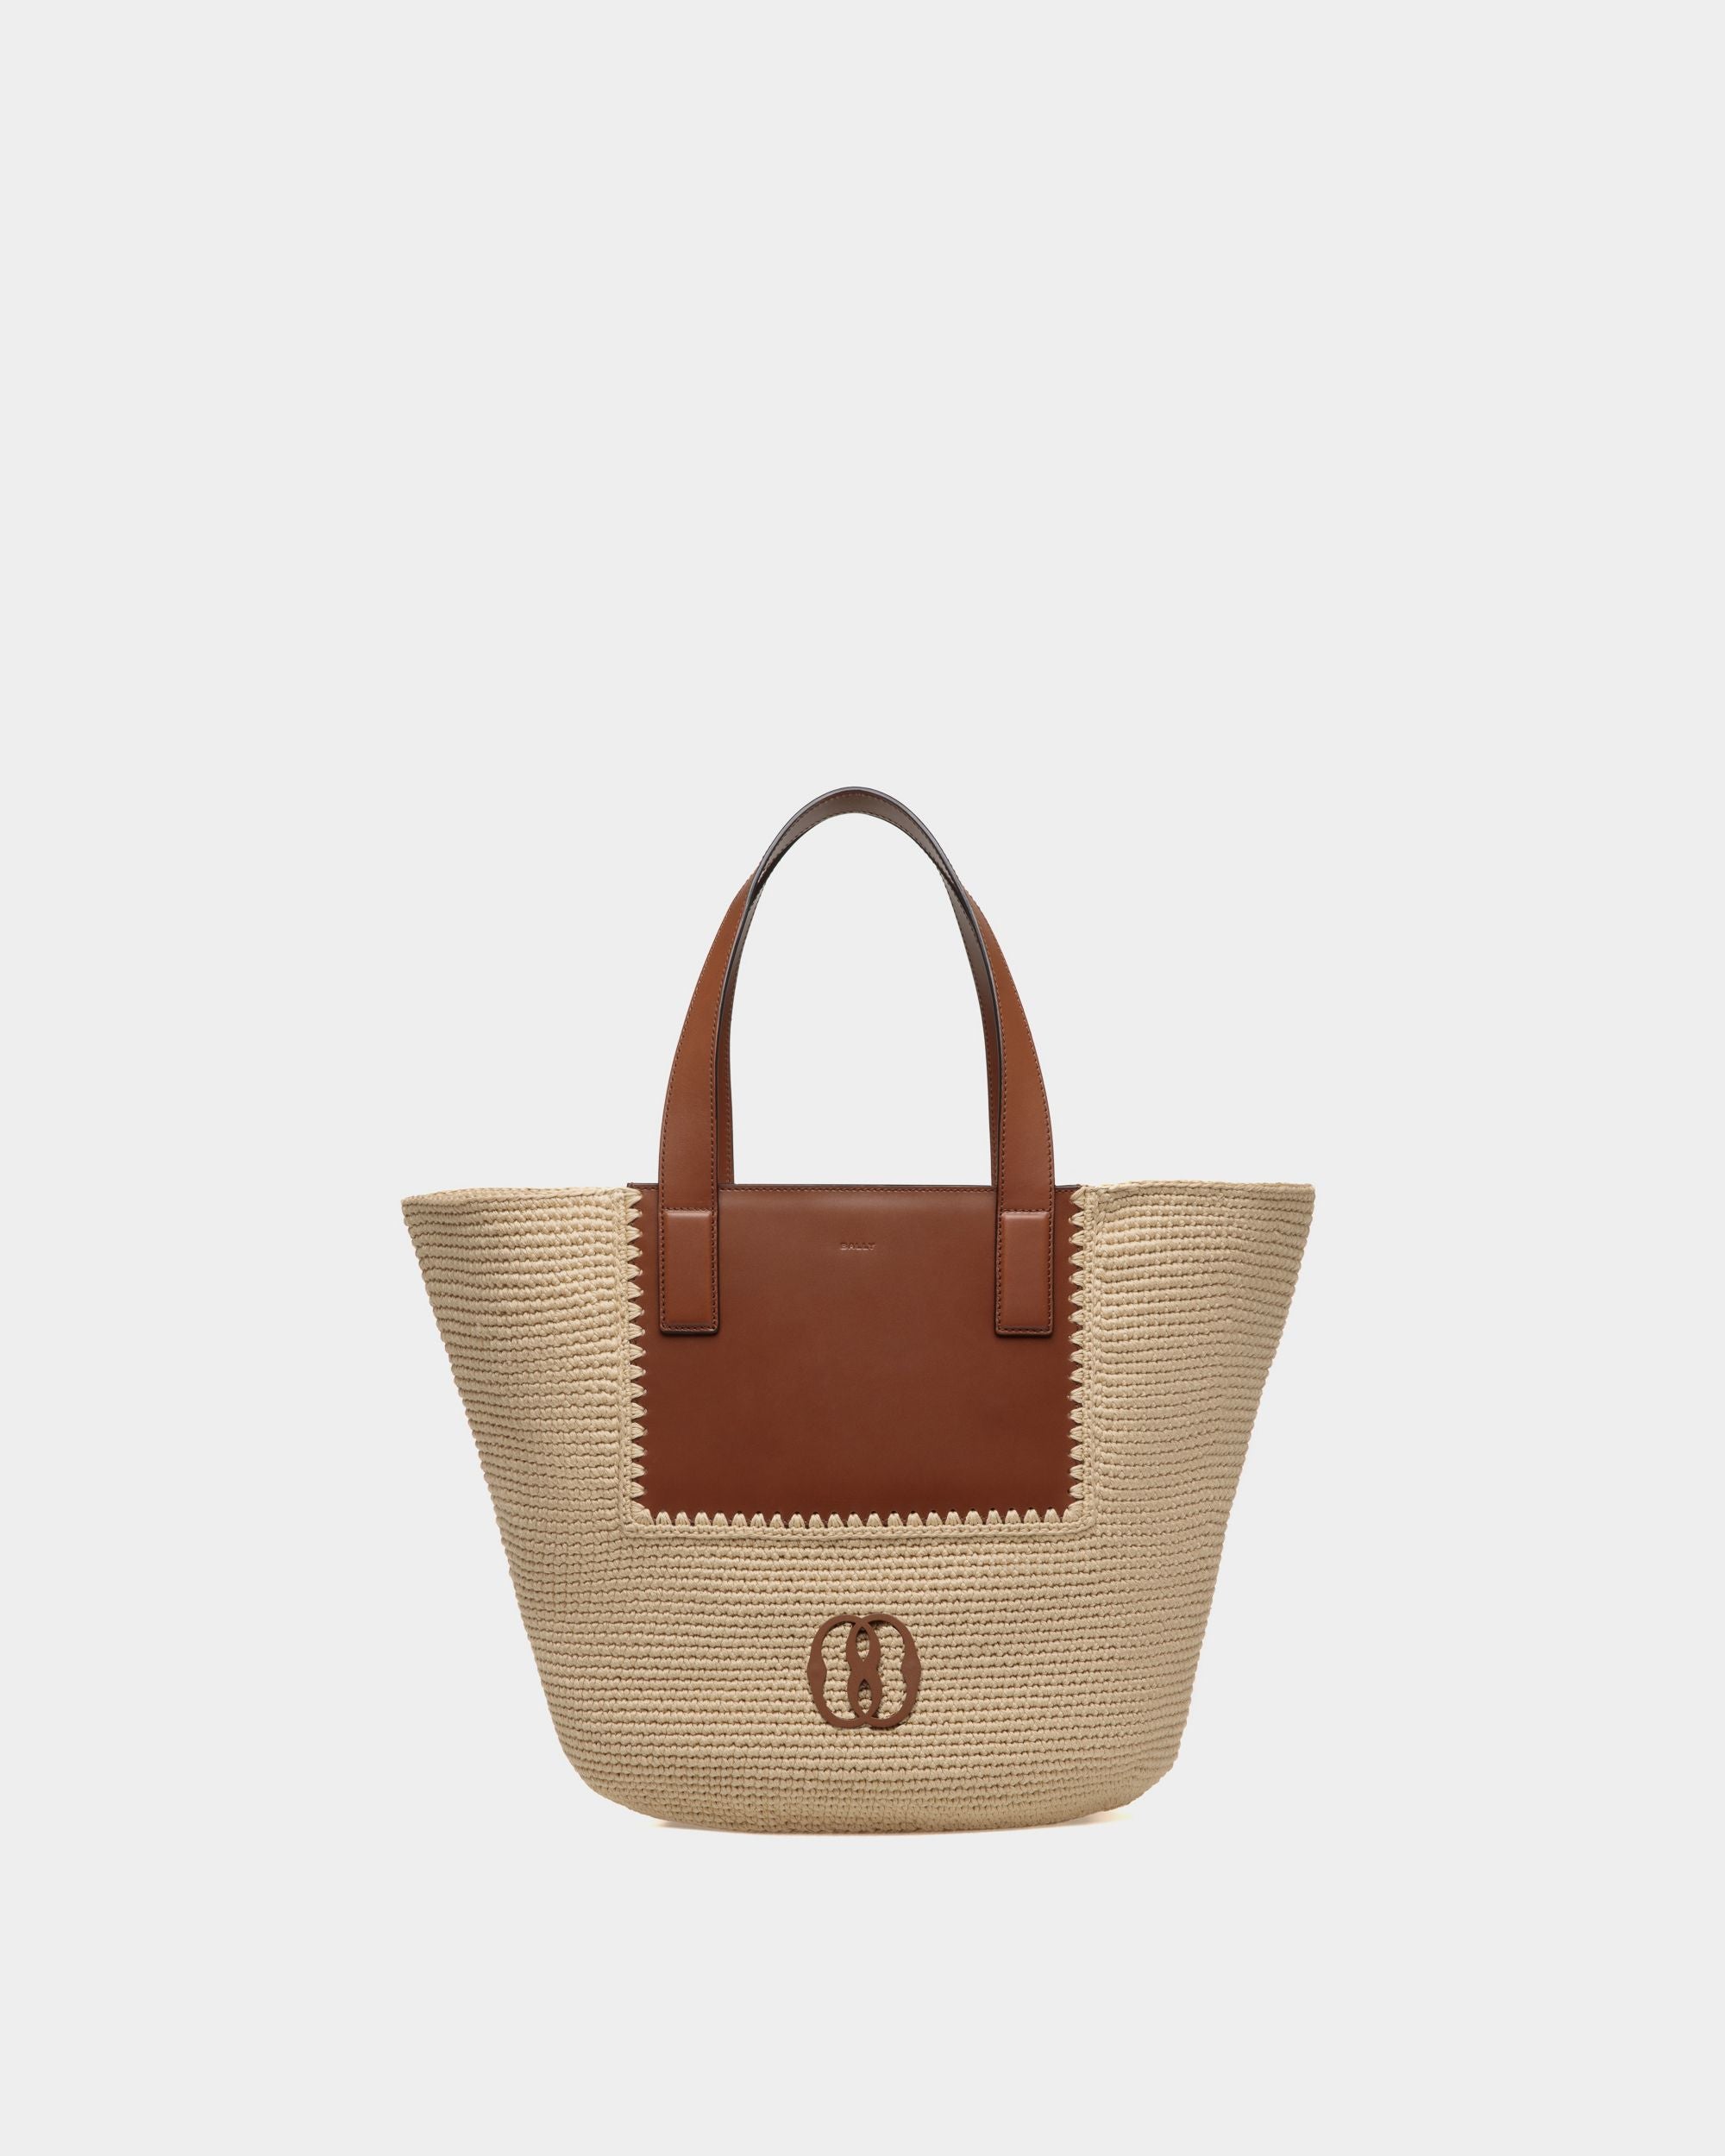 Women's Lace Tote Bag in Cotton and Leather | Bally | Still Life Front